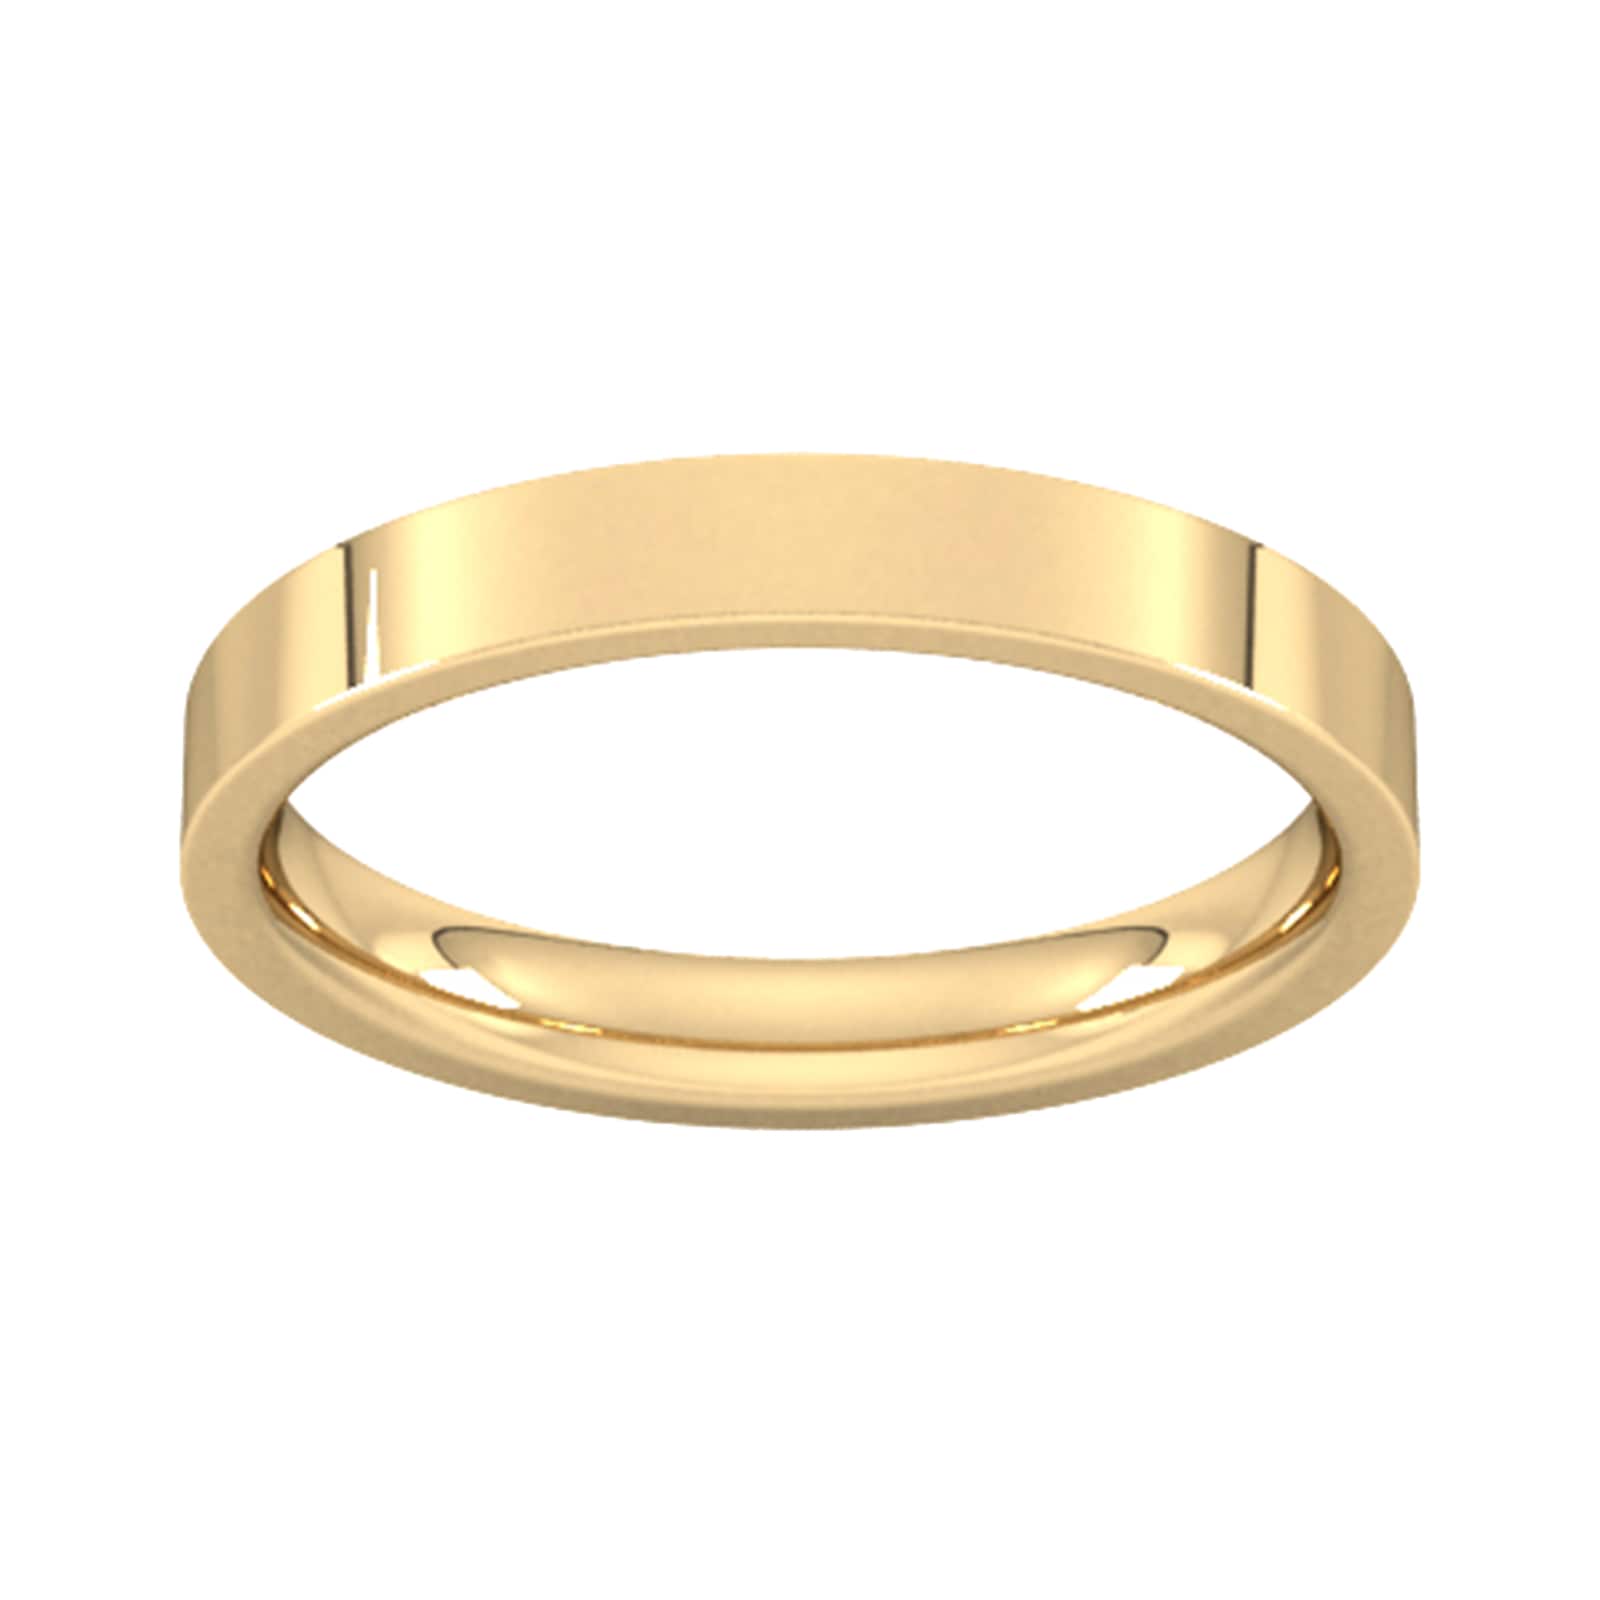 3mm Flat Court Heavy Wedding Ring In 9 Carat Yellow Gold - Ring Size P